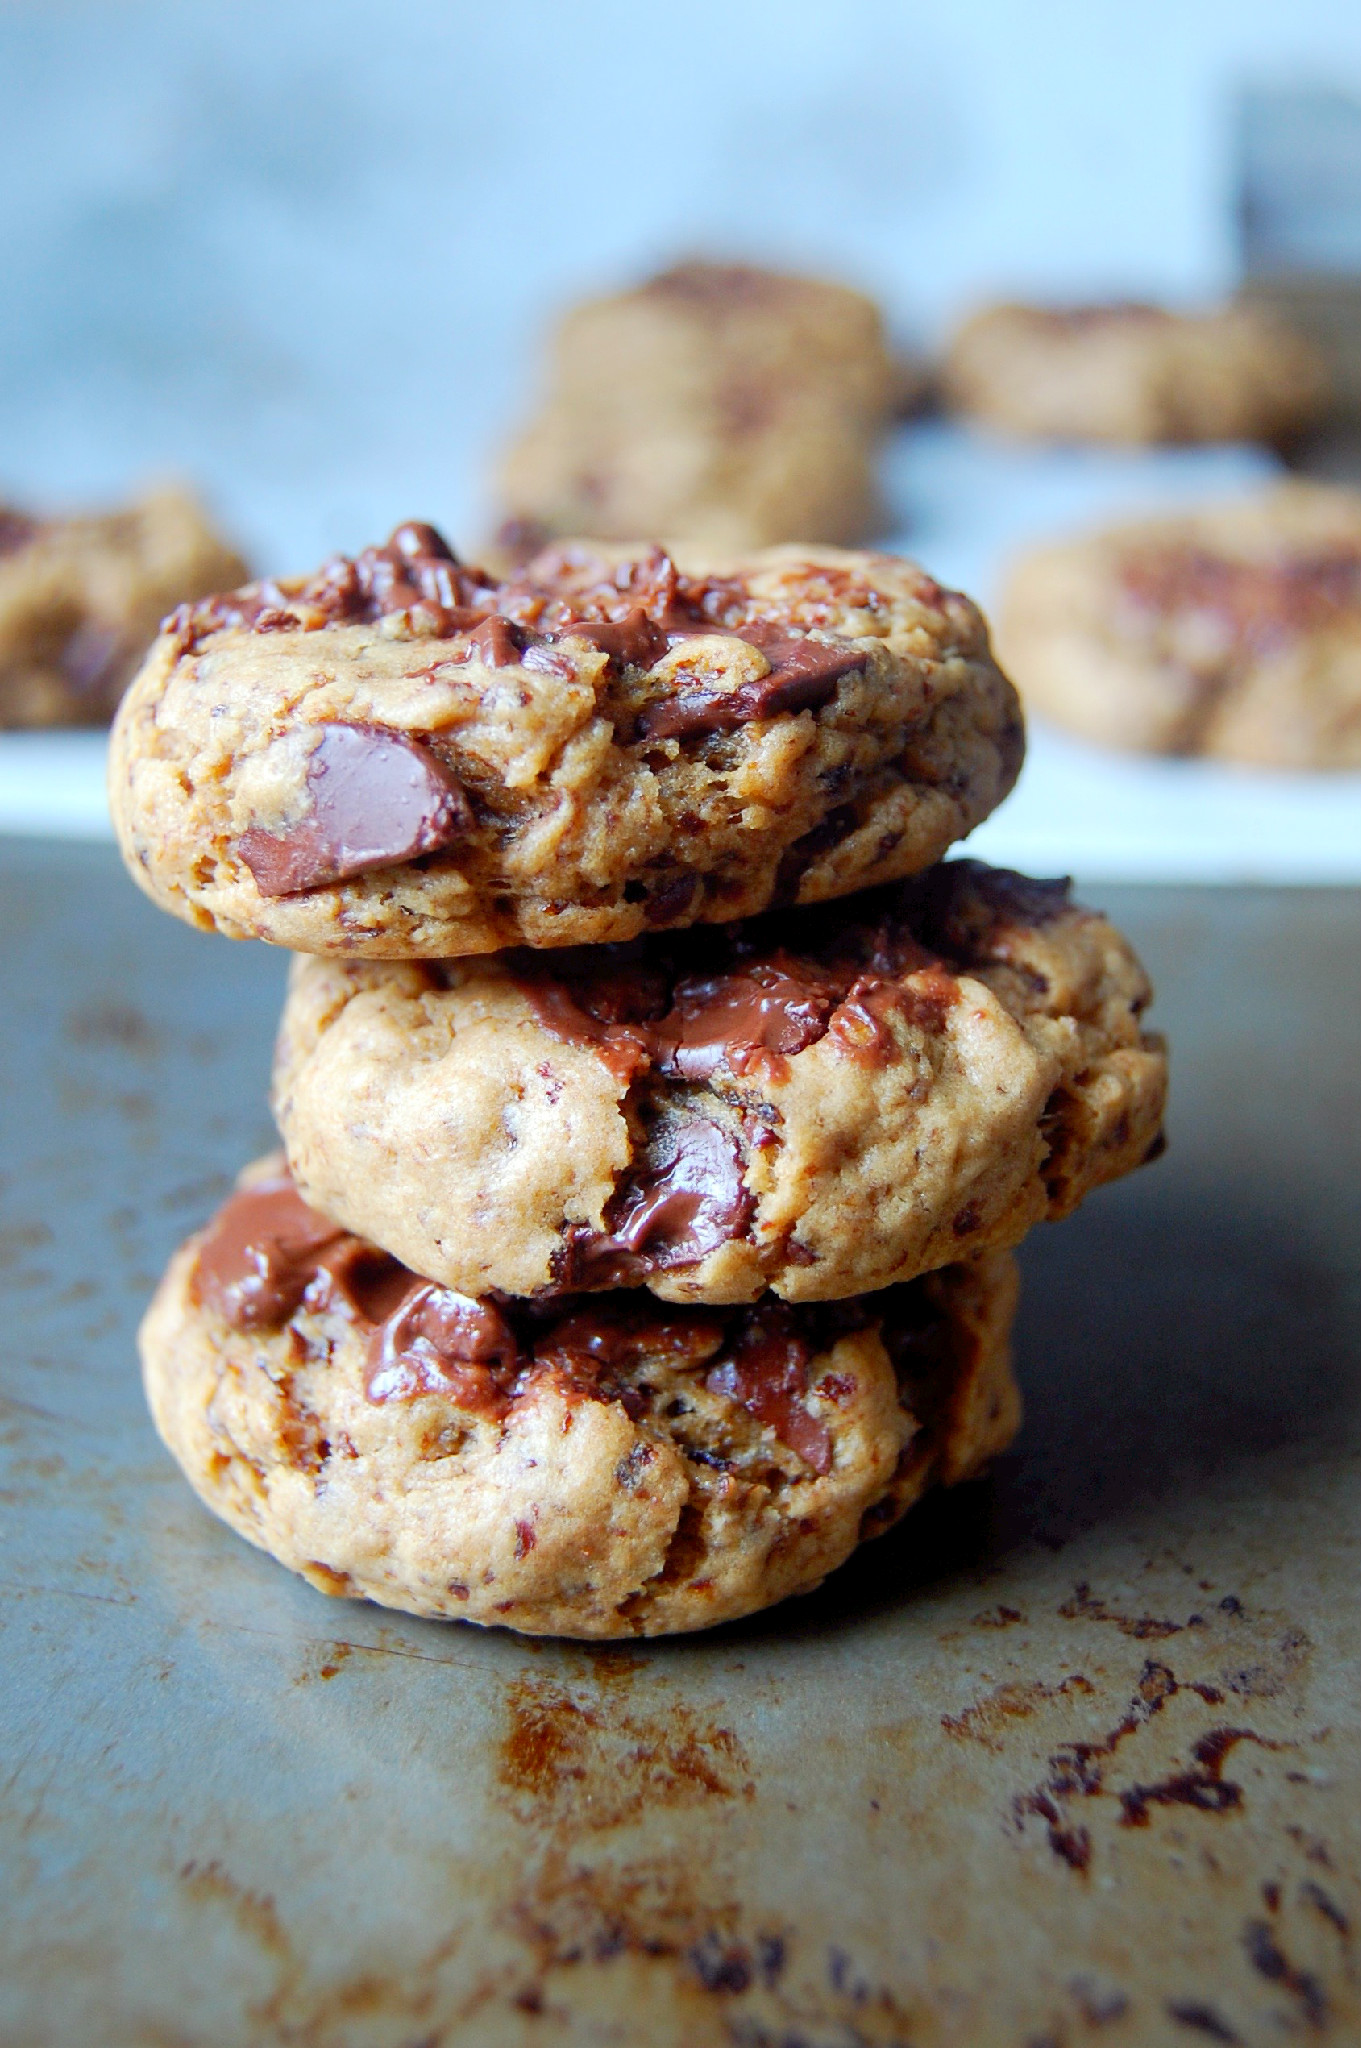 A healthier chocolate chip cookie recipe - made low-fat by using dried plum puree! | UprootKitchen.com